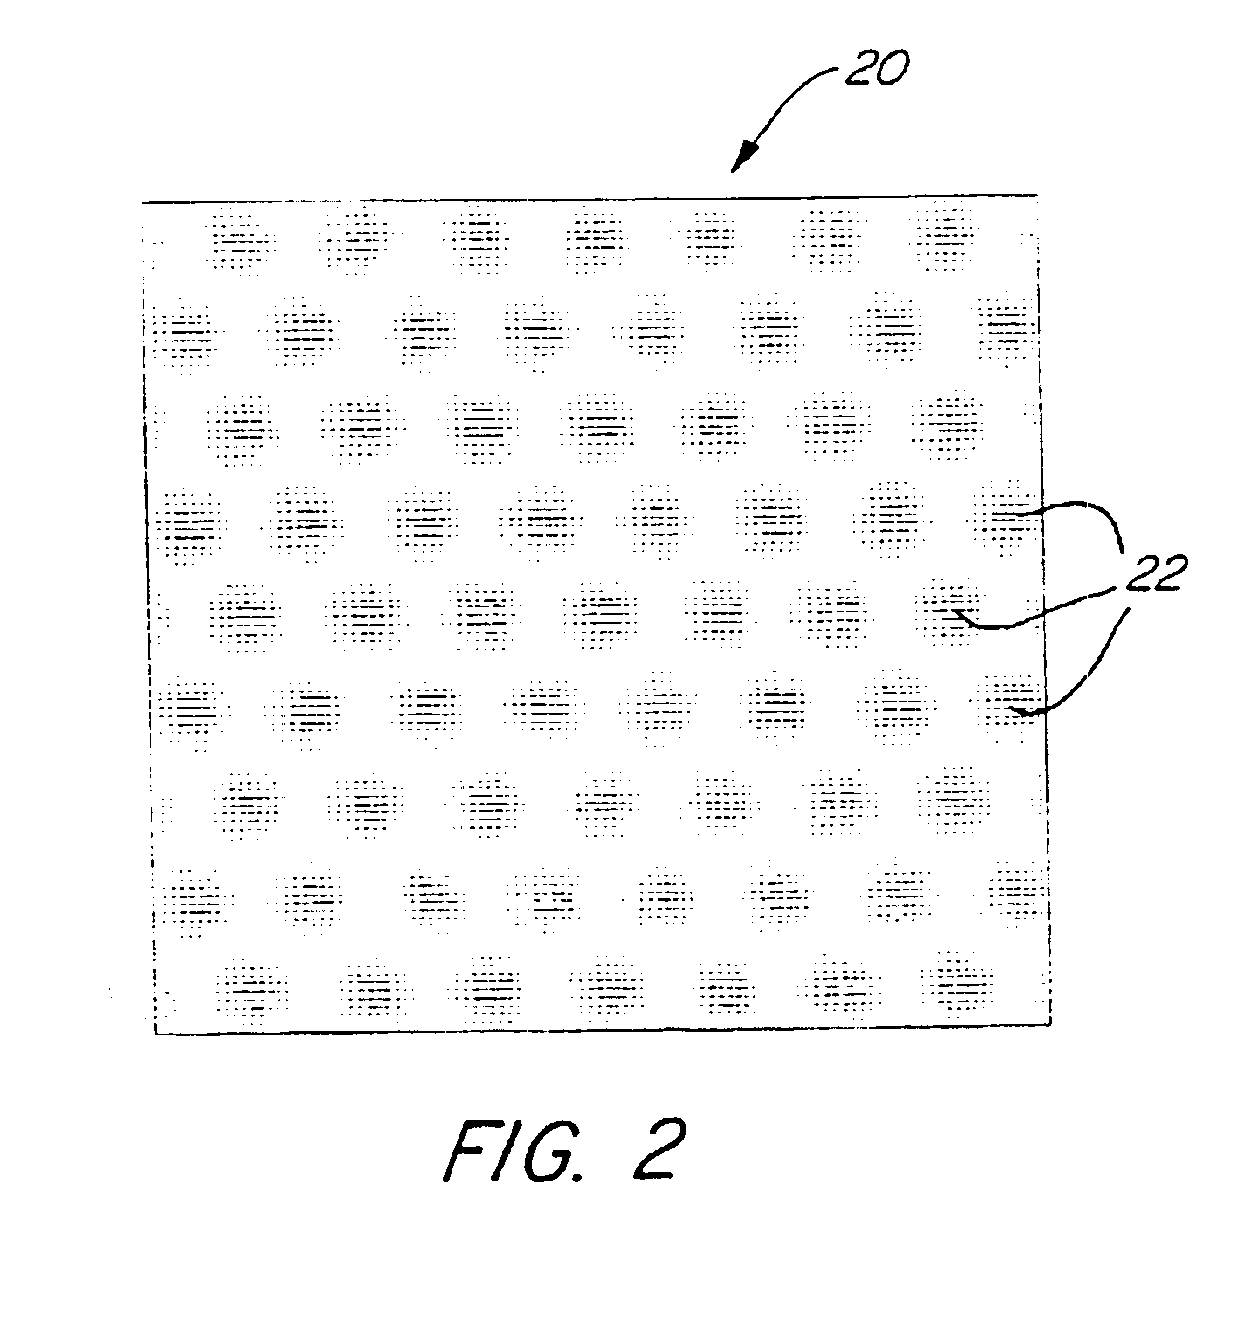 Apparatus and method for fabrication of photonic crystals